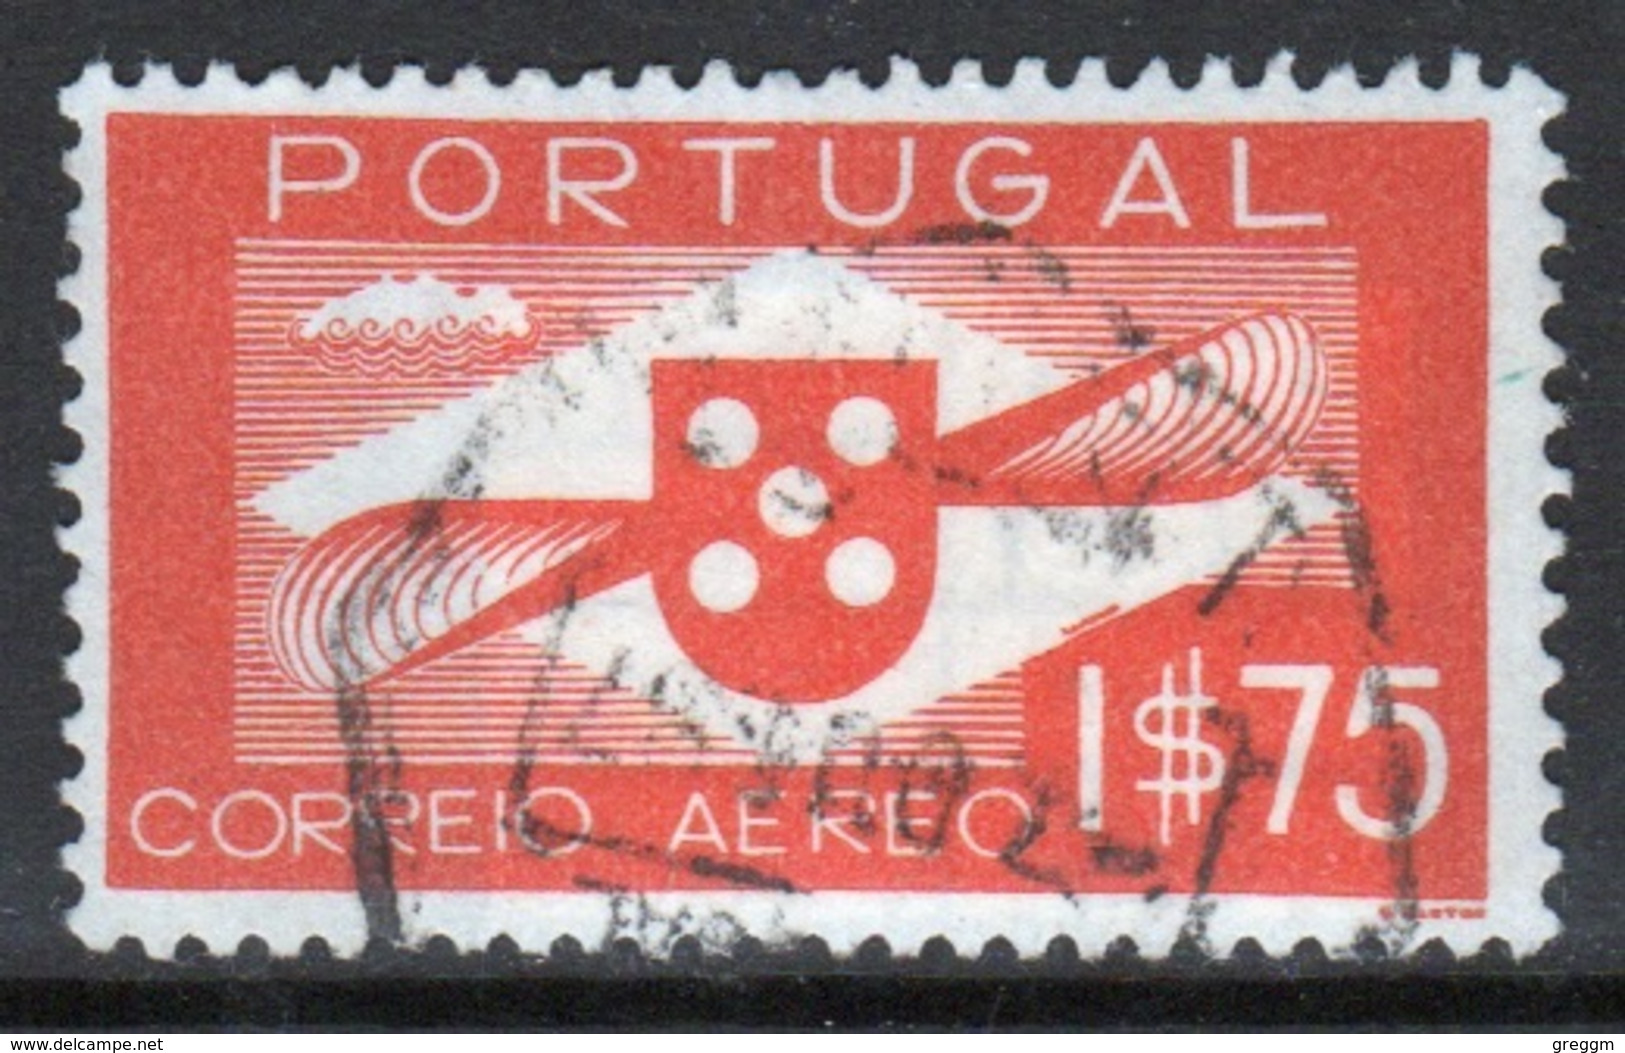 Portugal 1937 A Single $1.75  Stamp Used For AirMail. - Gebruikt